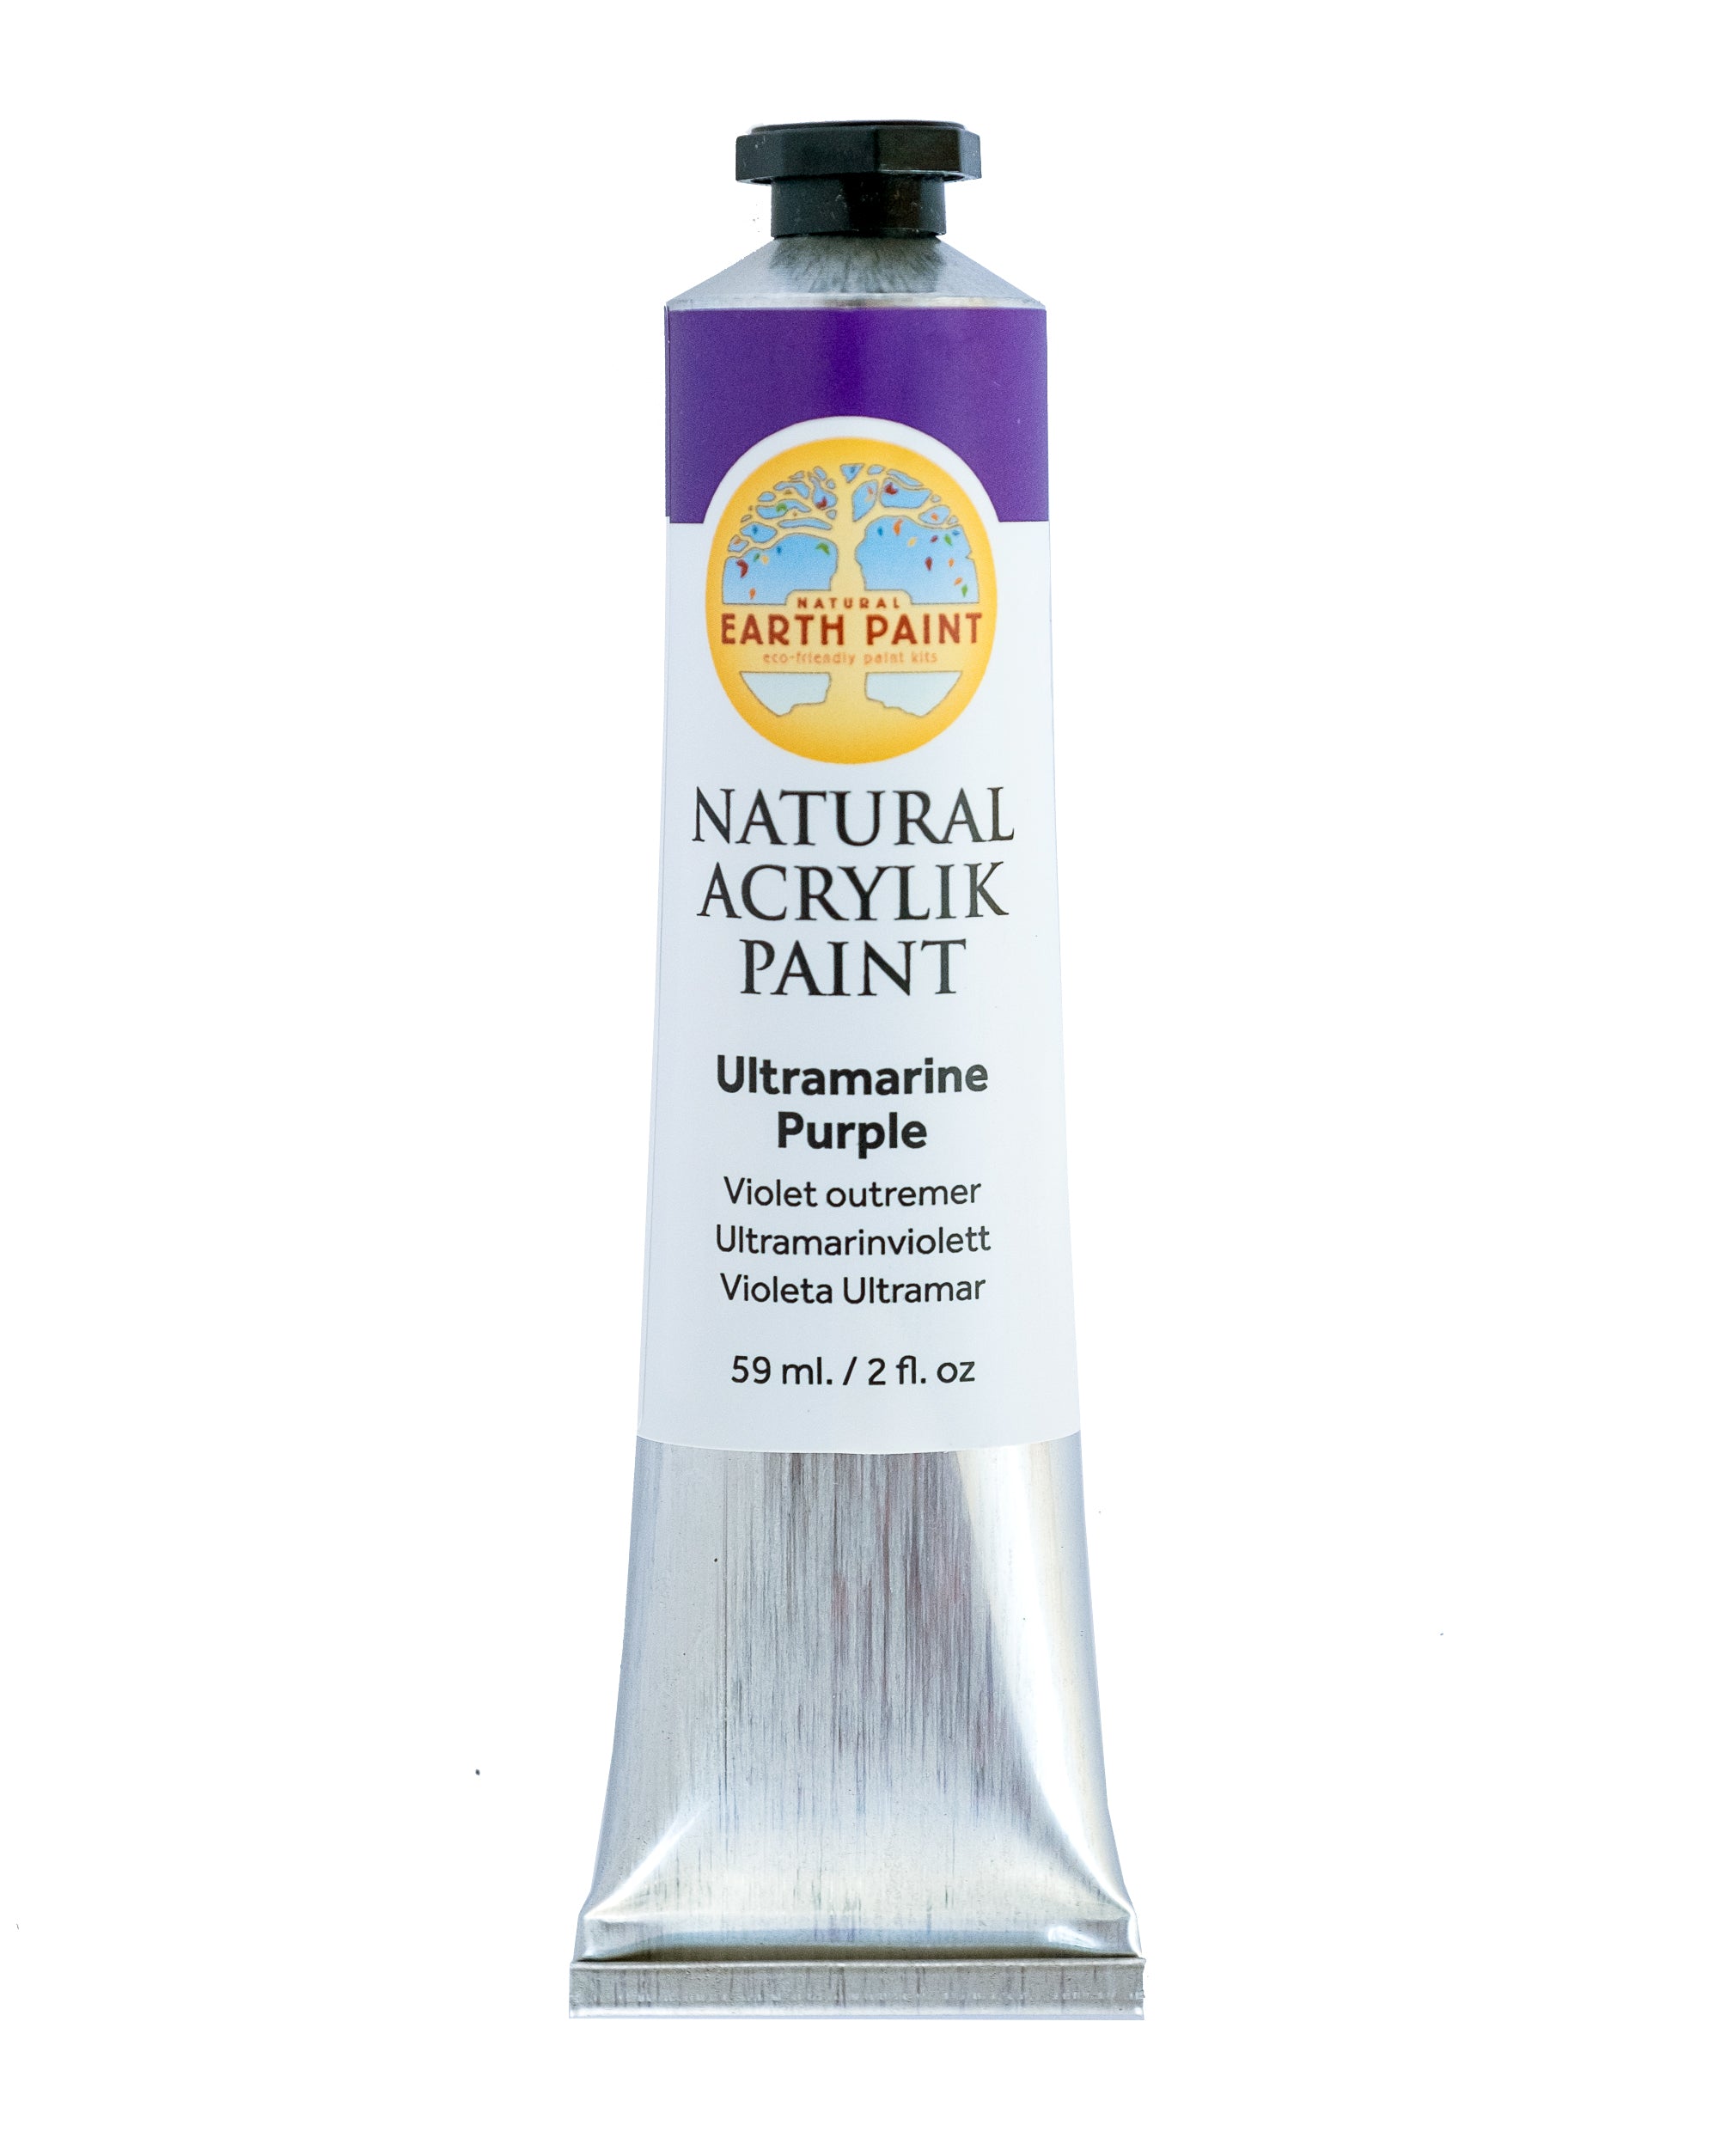 Natural Acrylik Paint™ - Individual Tubes-acrylic, acrylic paint, art, arts and craft, colors from the earth, earth colors, earth paint, earth pigments, eco art supplies, Eco Artist Paints, eco friendly paints, eco-friendly art supplies, eco-friendly paint, Fine Art Supplies Products, natural acrylic, natural artist paints, natural earth colors, natural paint, natural paints, non-toxic paint, nontoxic artist paints, nontoxic artist supplies, nontoxic paints, paint, sustainable art supplies-Ultramarine Purpl